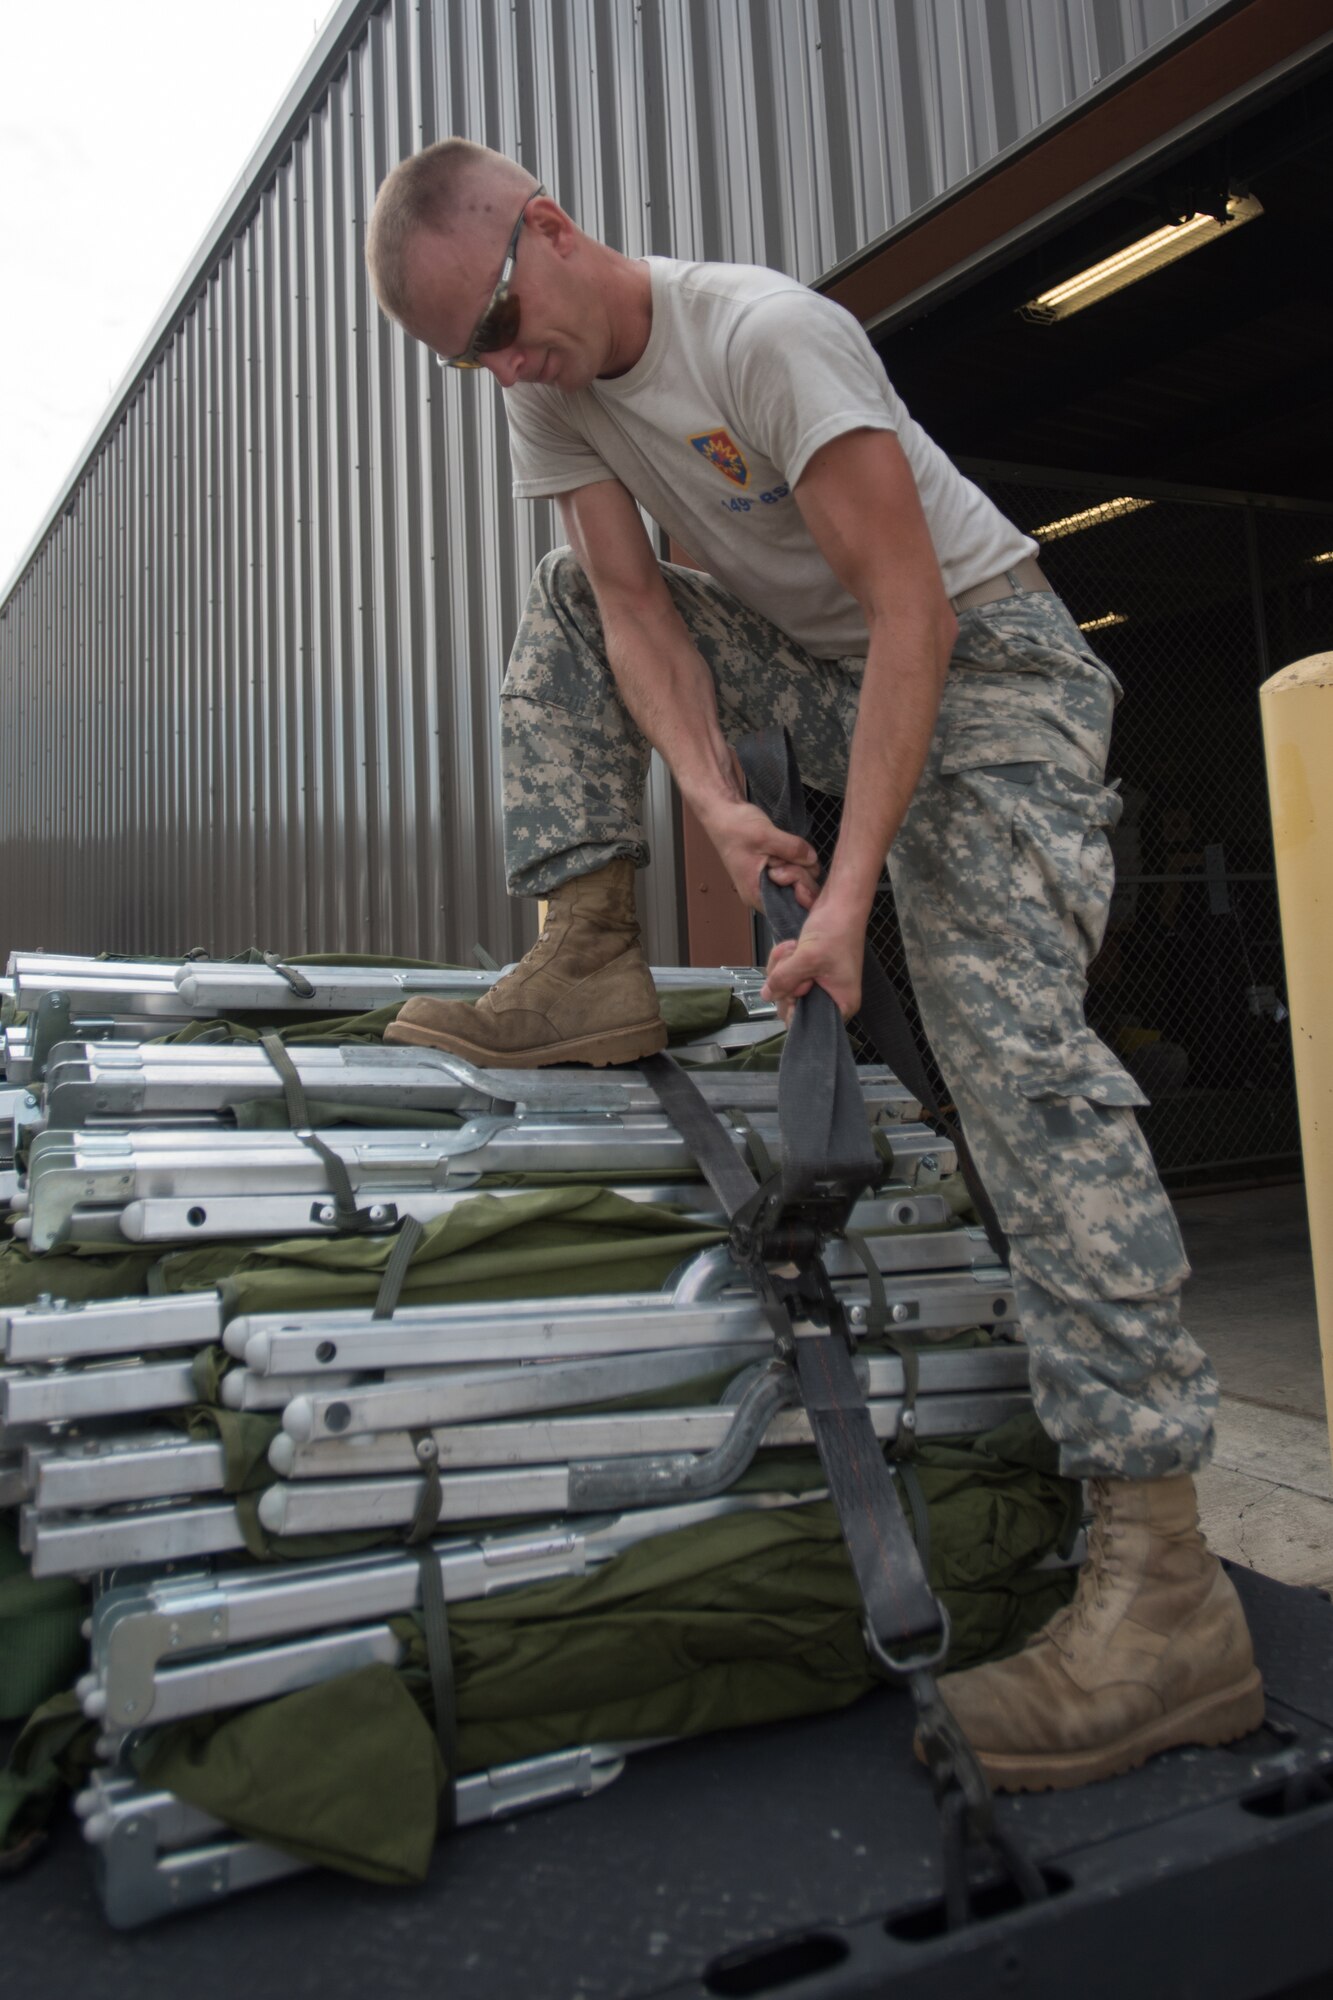 Sgt. Joseph Foriest, a transportation specialist for the Kentucky Army National Guard’s 149th Brigade Support Battalion, tightens down straps across cots at Barkley Regional Airport in Paducah, Ky., July 14, 2016, in preparation for Bluegrass Medical Innovative Readiness Training. The program will offer medical and dental care at no cost to residents in three Western Kentucky locations from July 18 to 27. (U.S. Air National Guard photo by Master Sgt. Phil Speck)